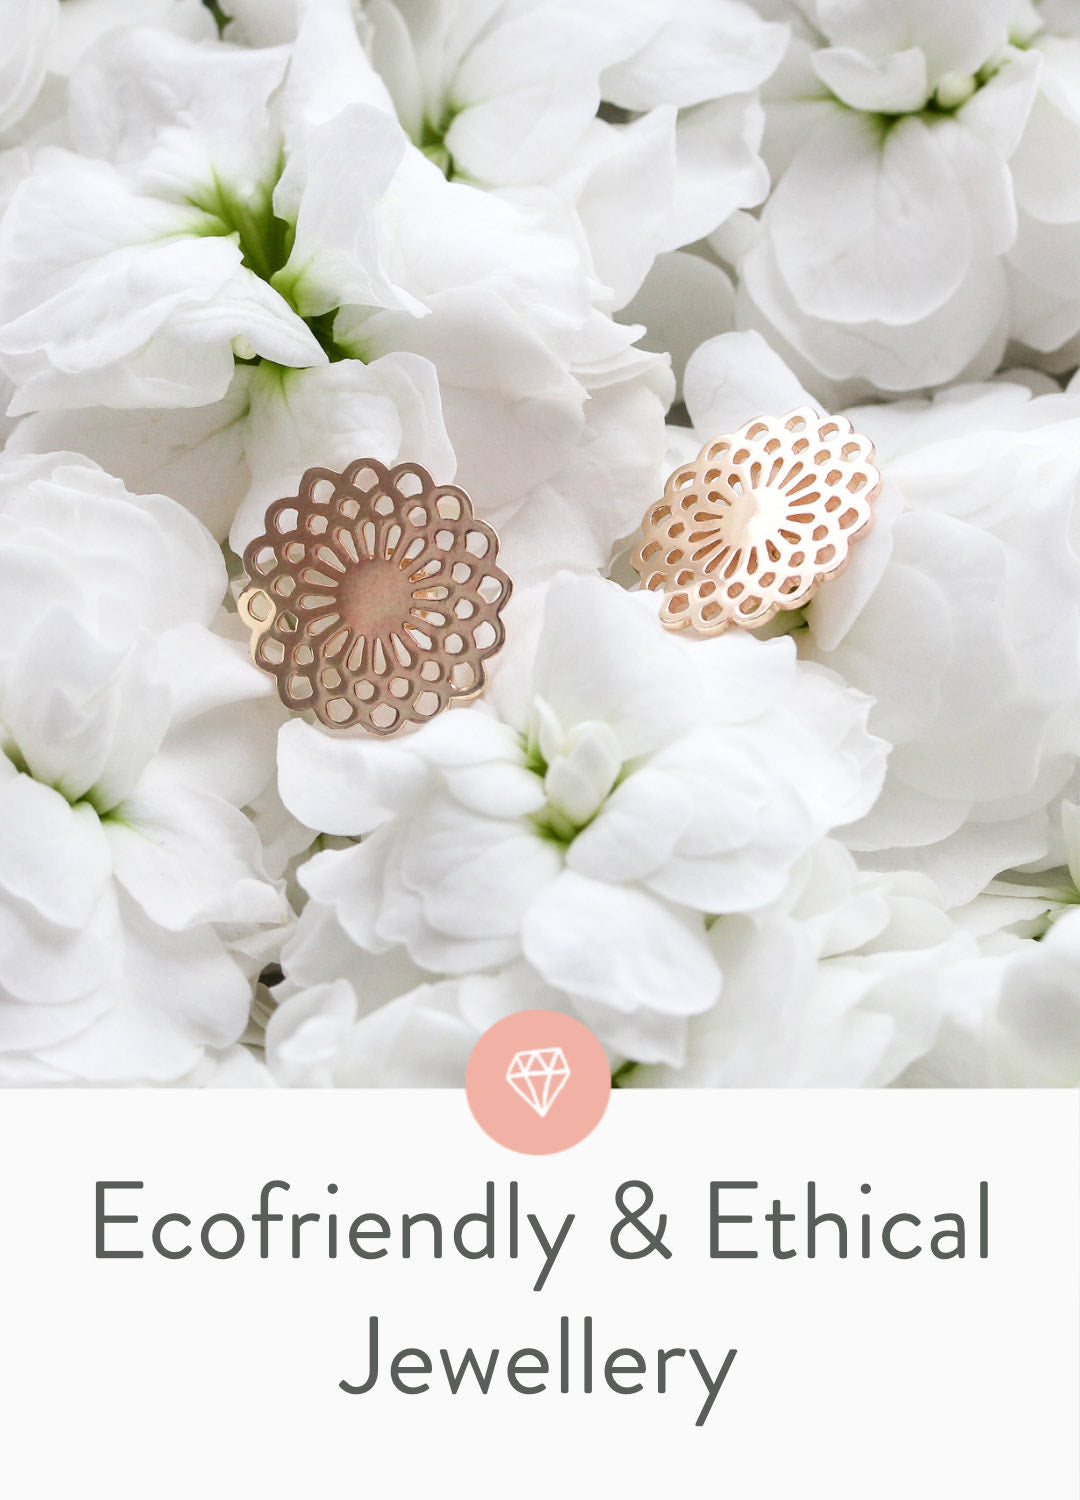 Sustainable, ecofriendly and ethical jewellery in Australia